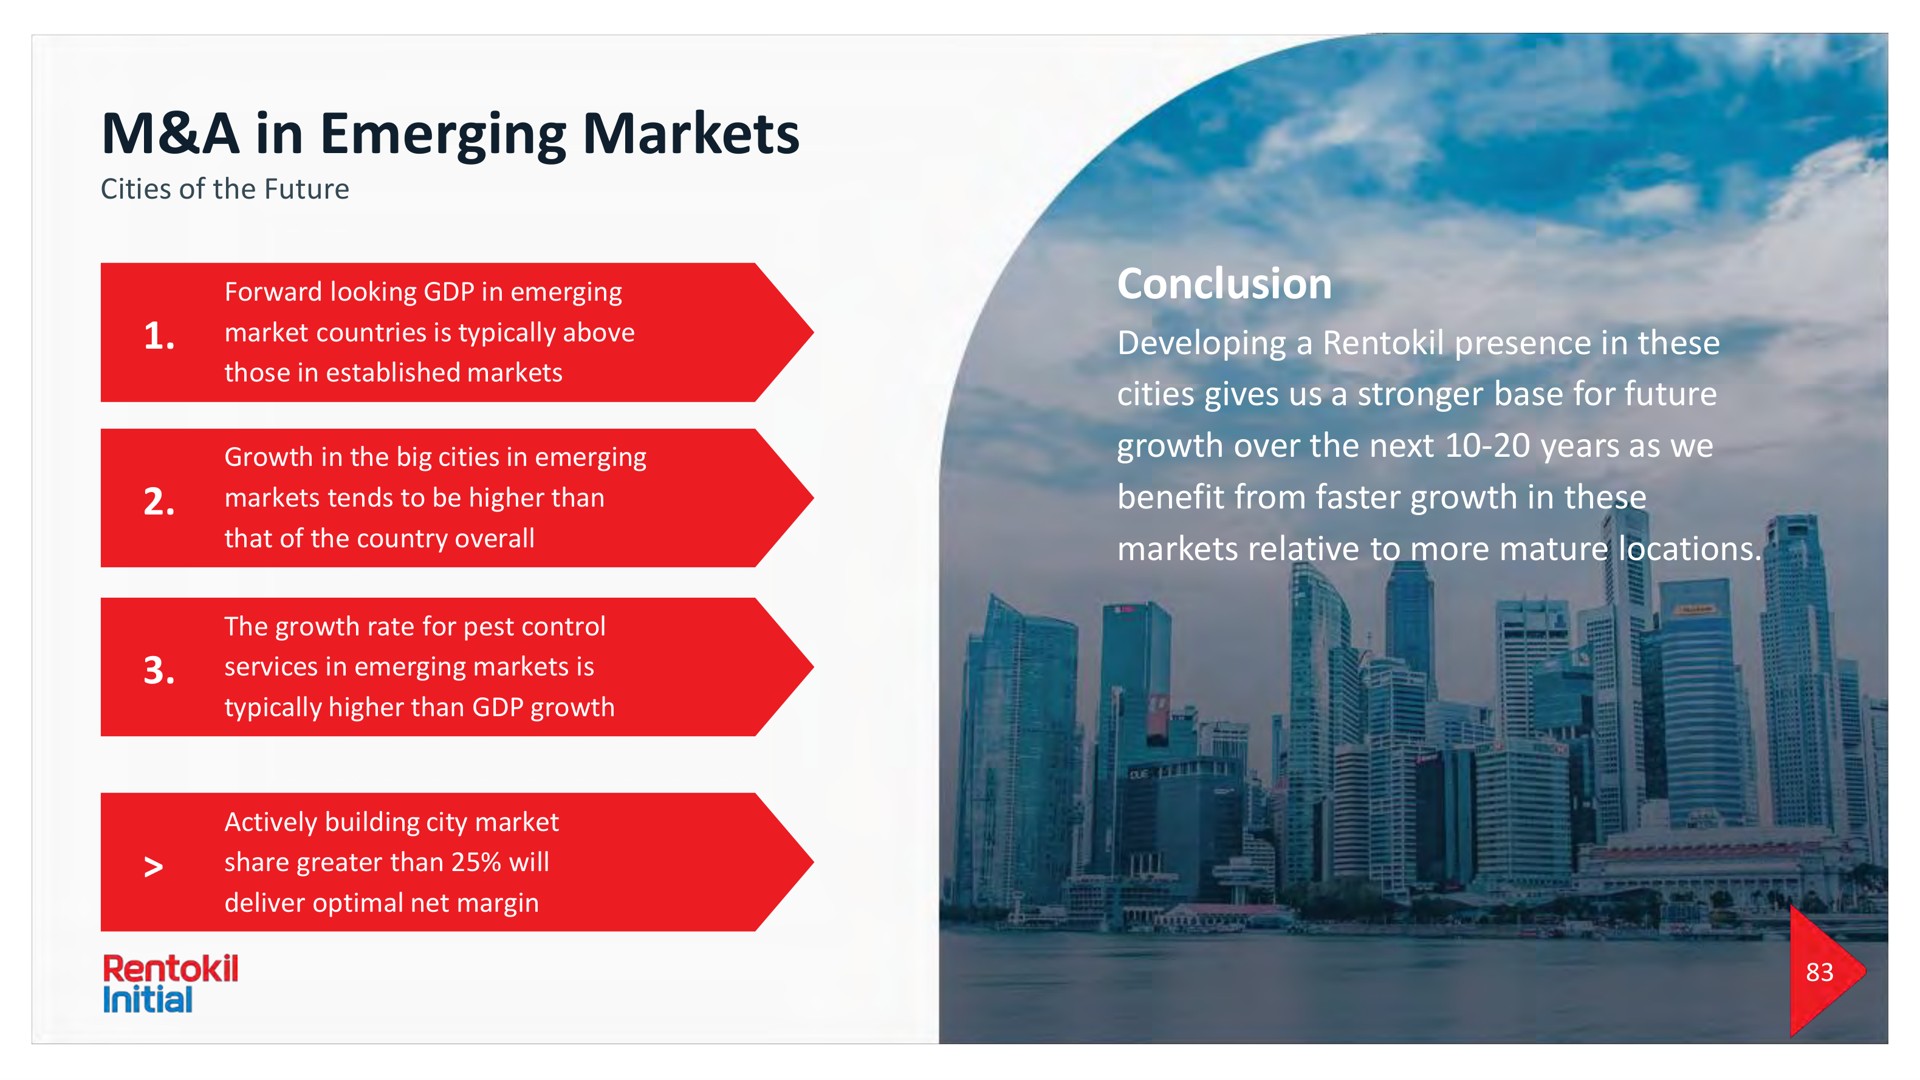 a in emerging markets conclusion developing a presence in these cities gives us a base for future growth over the next years as we benefit from faster growth in these markets relative to more mature locations | Rentokil Initial